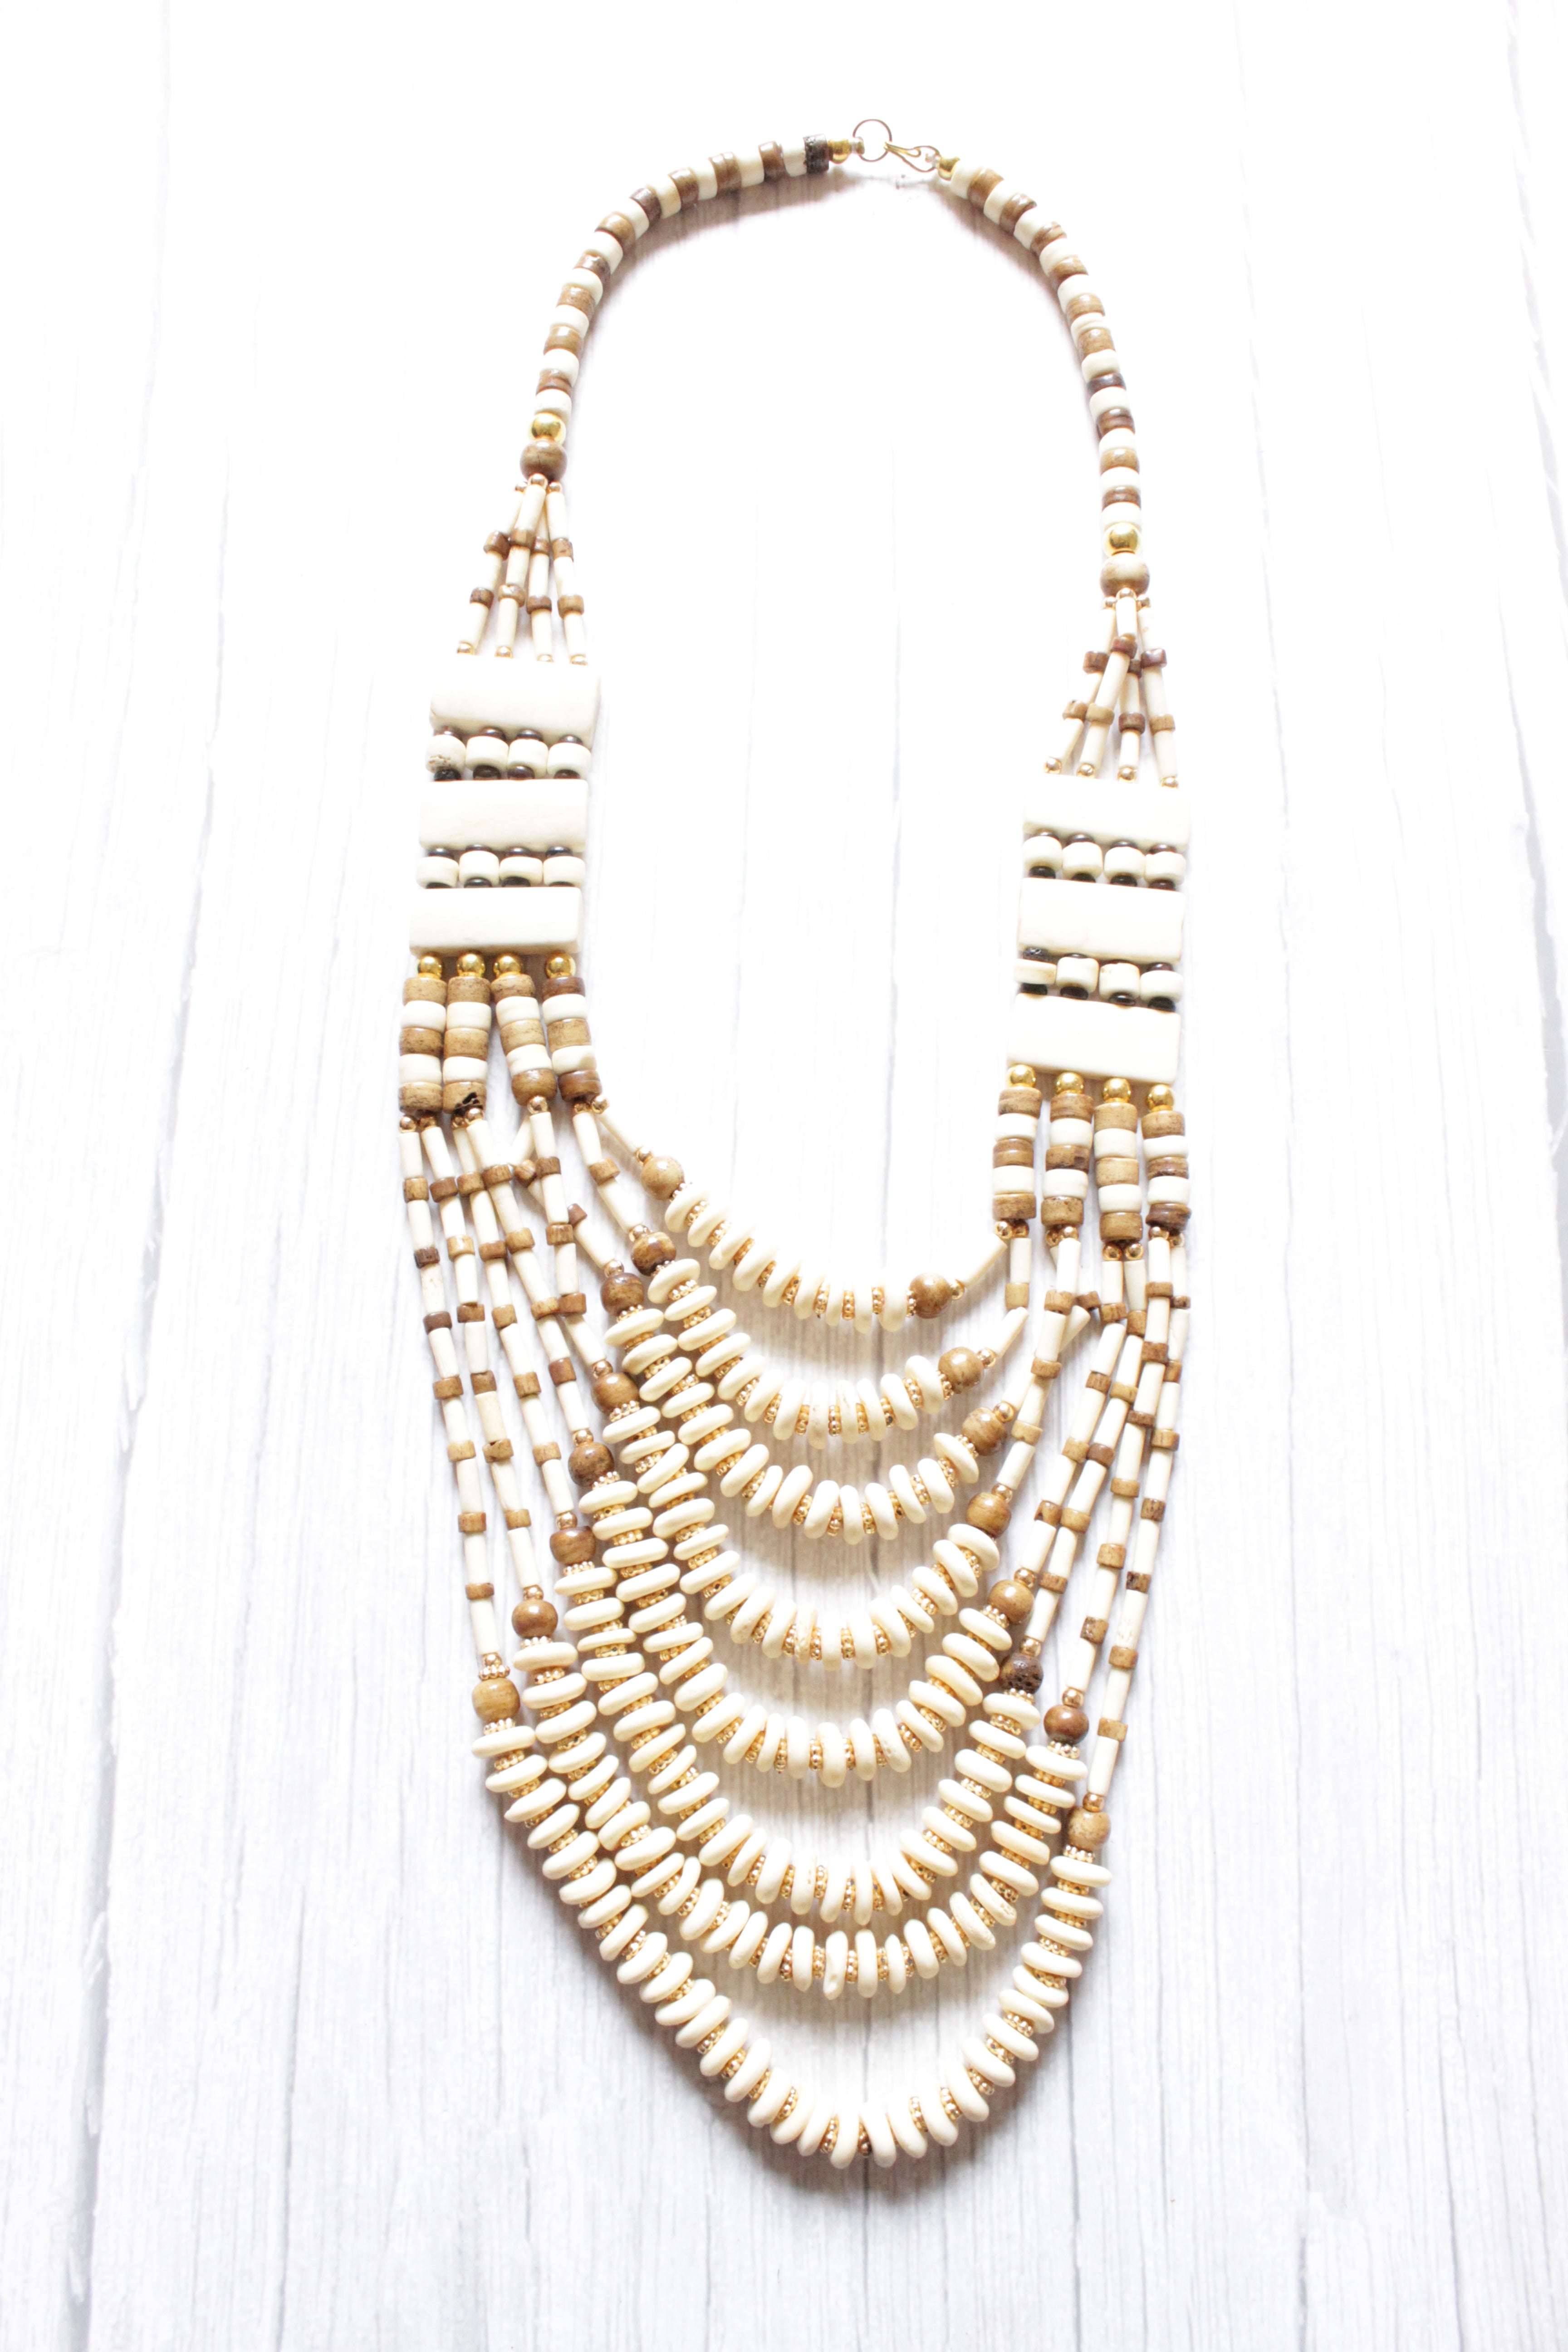 Elegant White and Brown Beads Handcrafted Statement Necklace